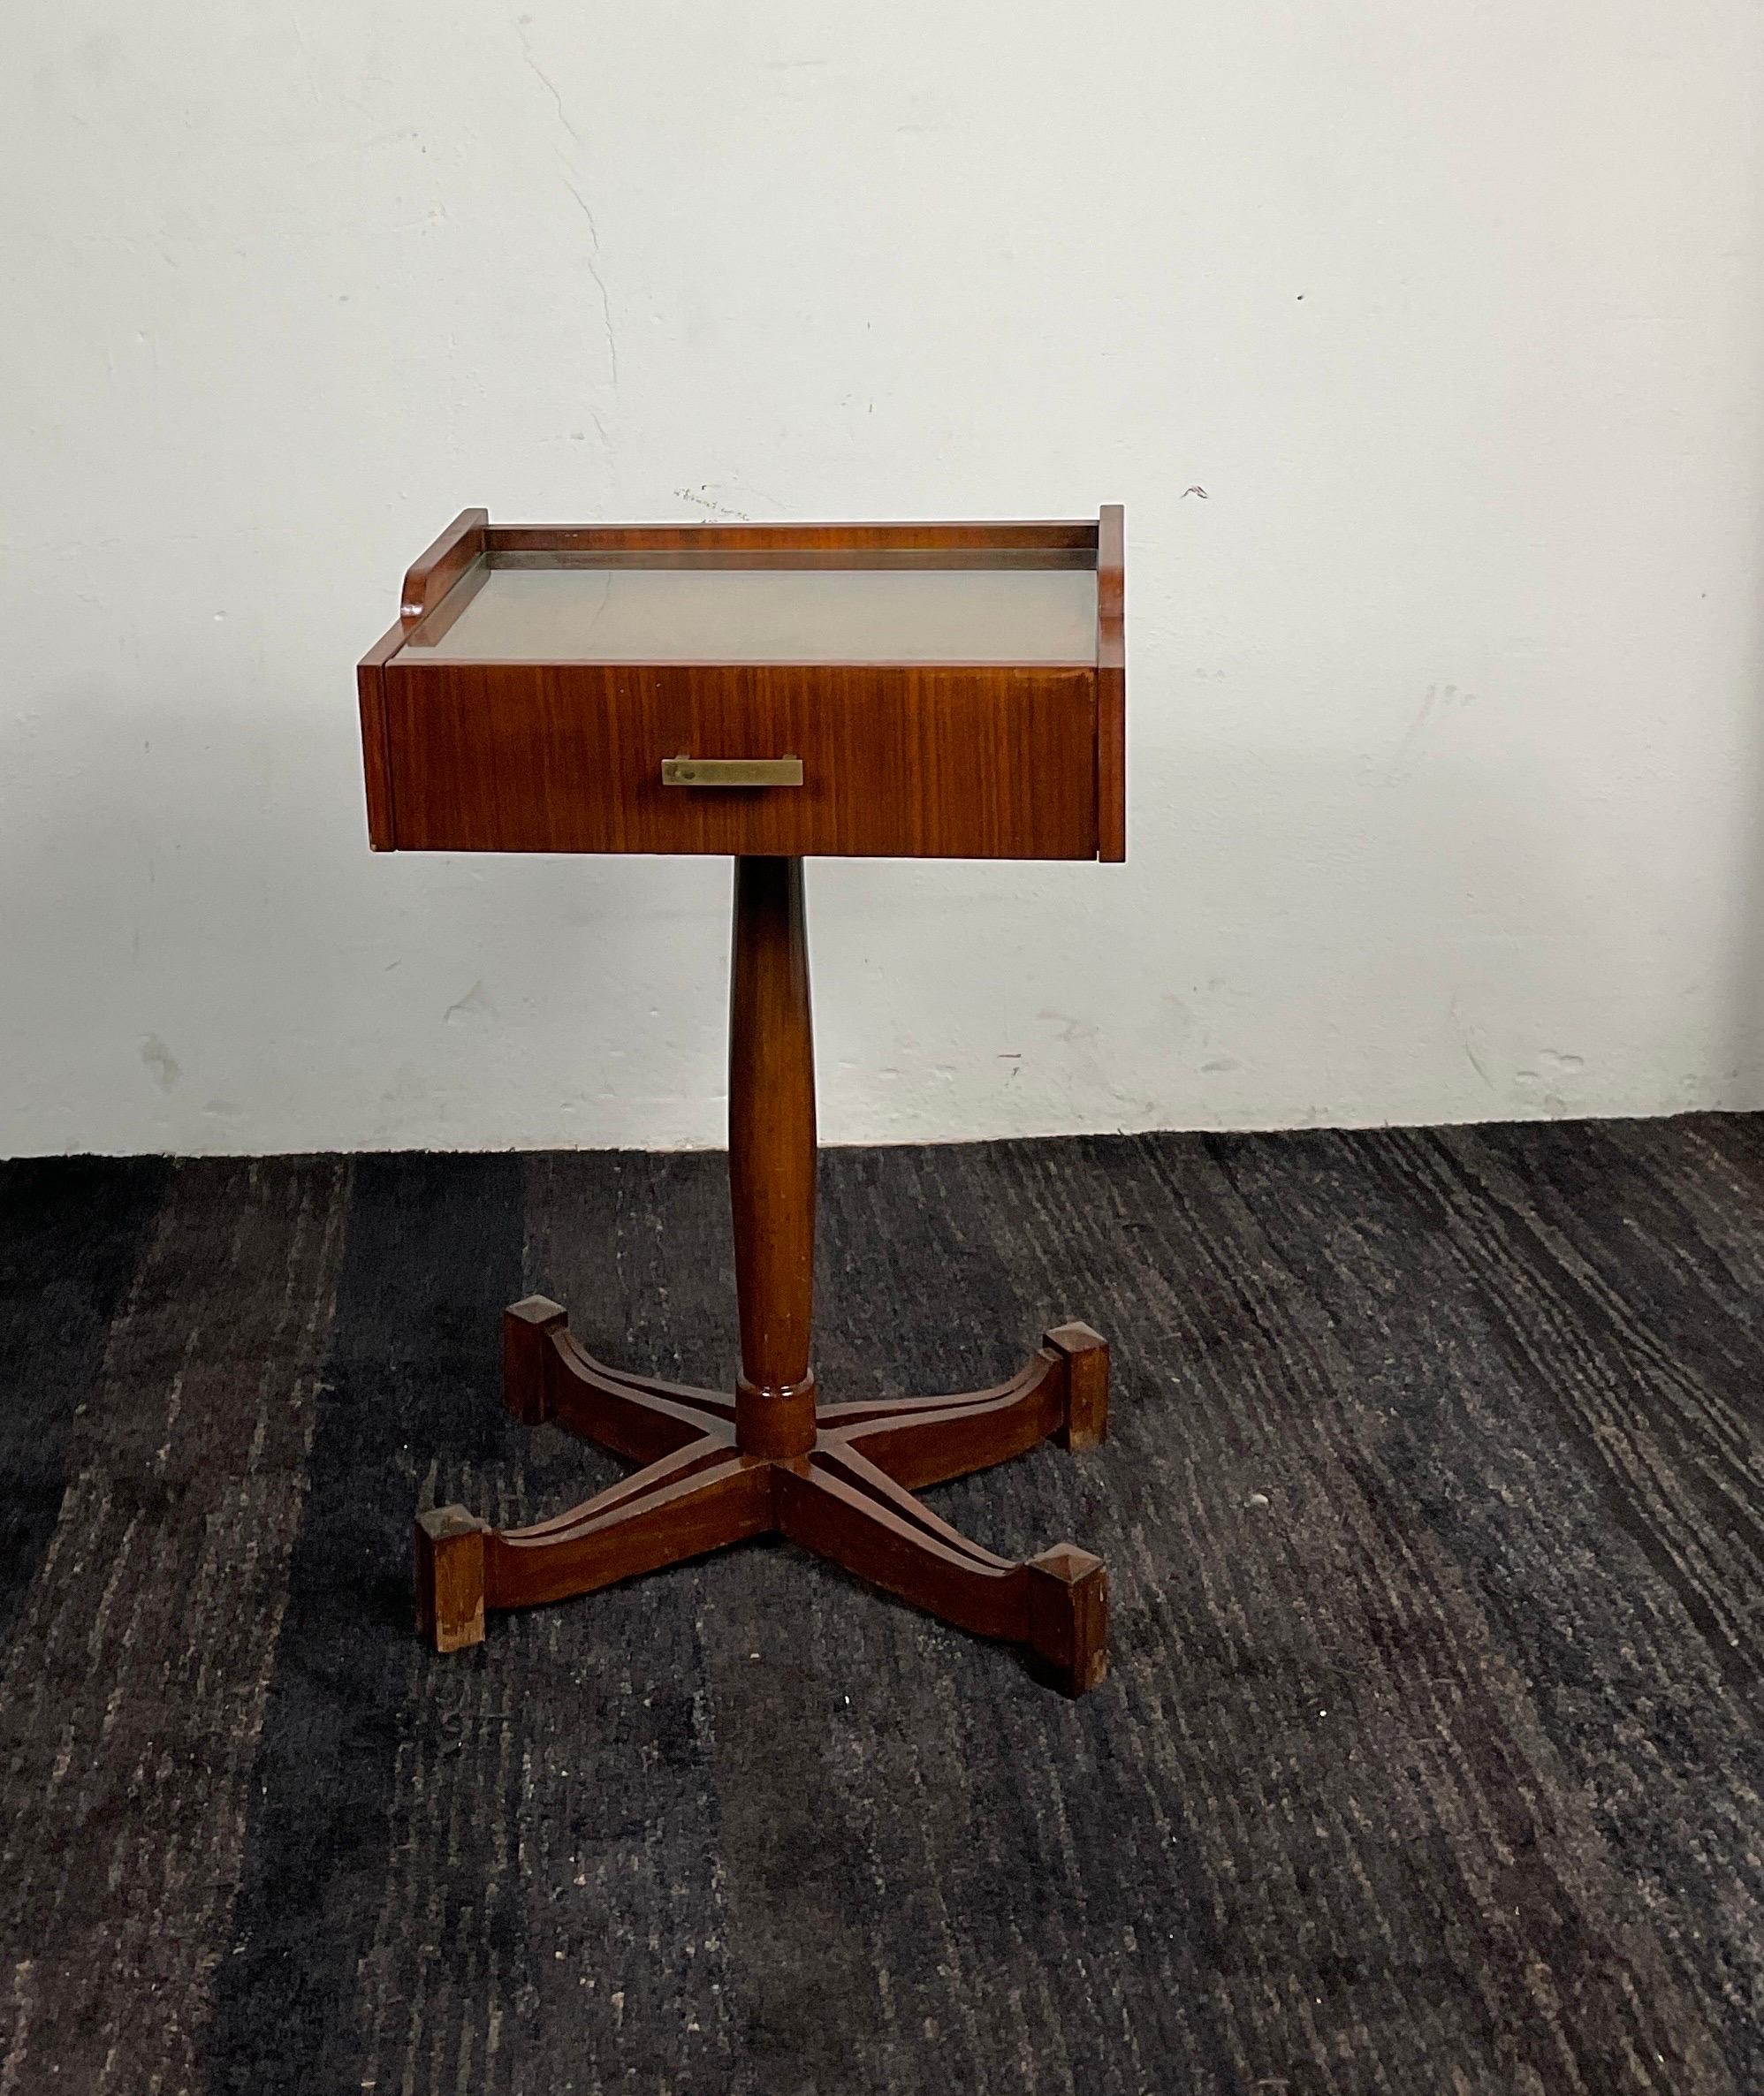 Mid-Century Modern Wooden Nightstand Sc 50 Model by Carlo Salocchi for Sormani 60's, Italy For Sale